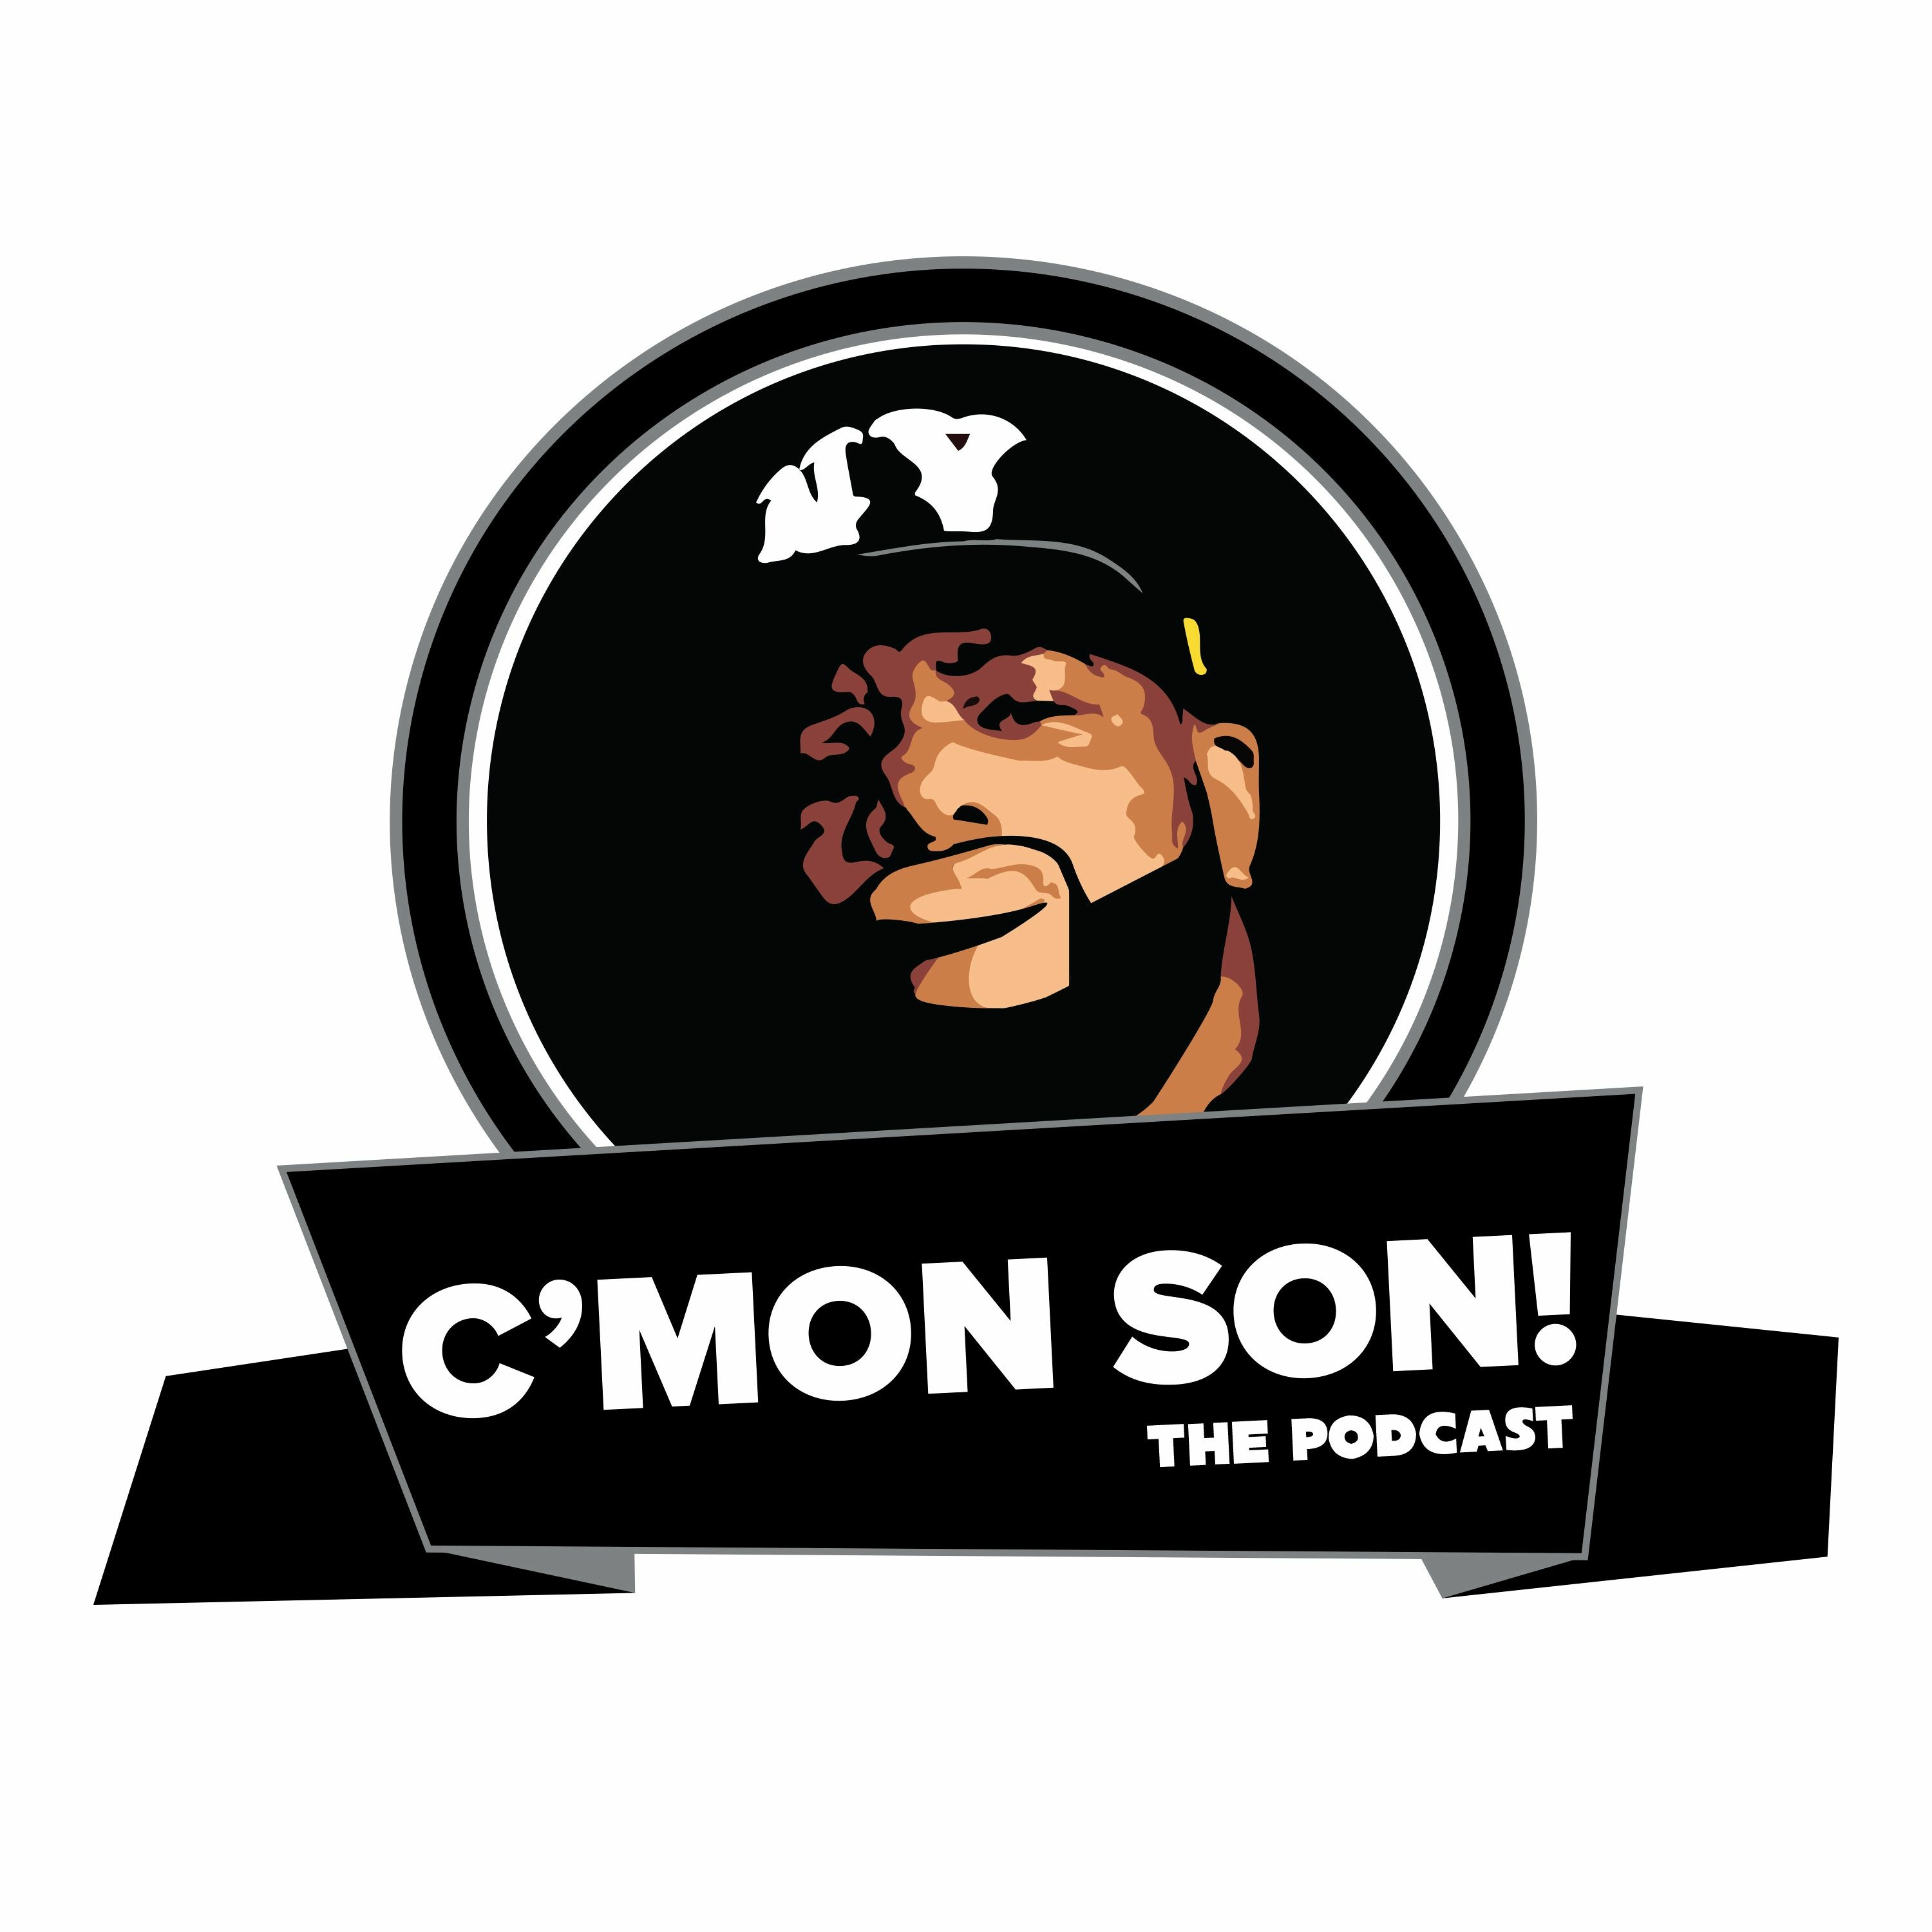 C'Mon Son! The Podcast Series #1 Episode #8: Old Cool vs. New Cool with Nick Grant